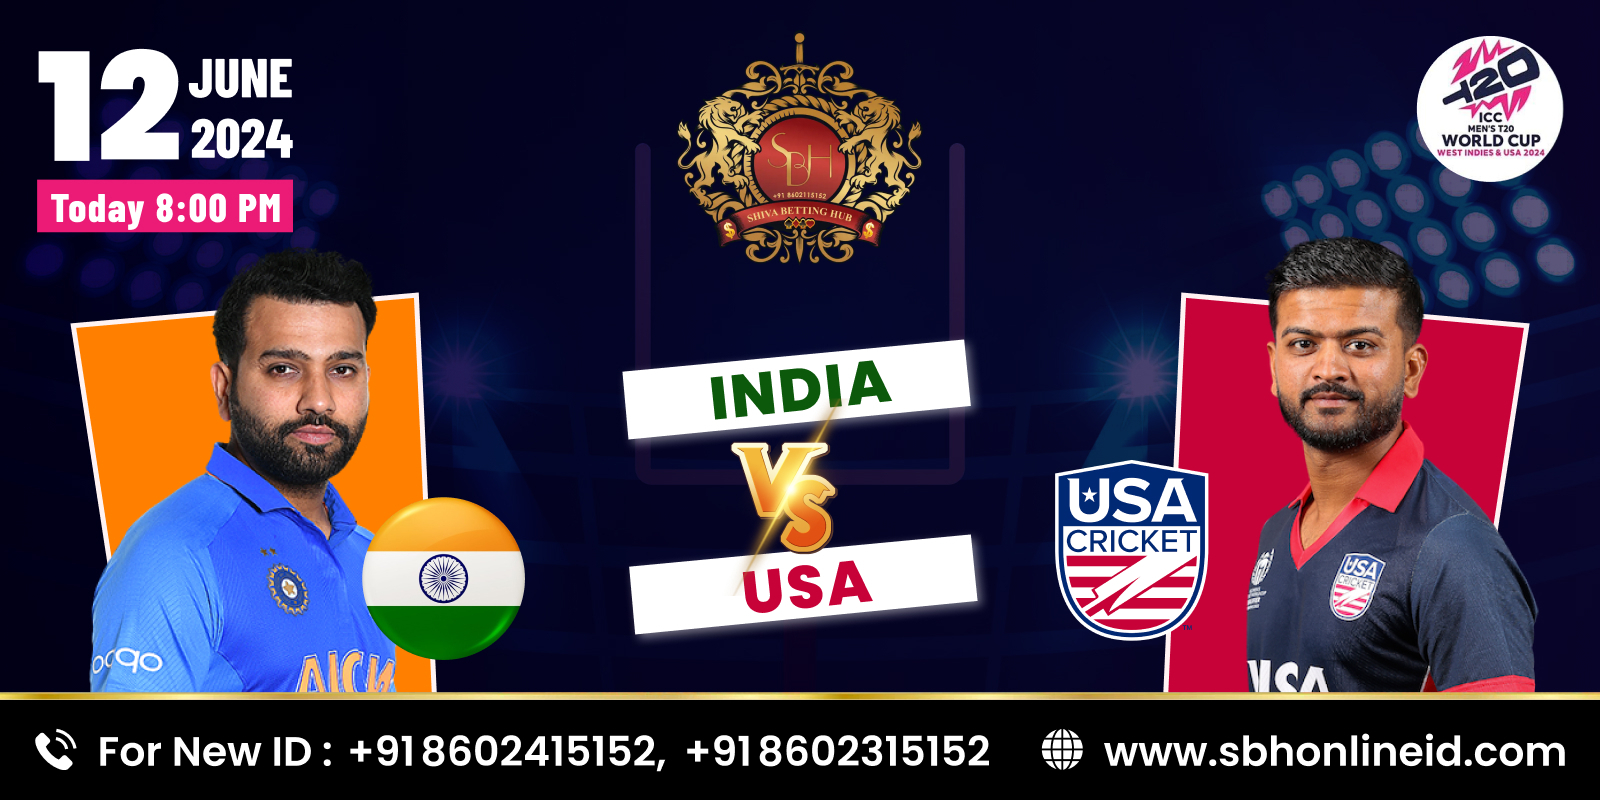 USA vs India T20 World Cup: Today’s Match Prediction